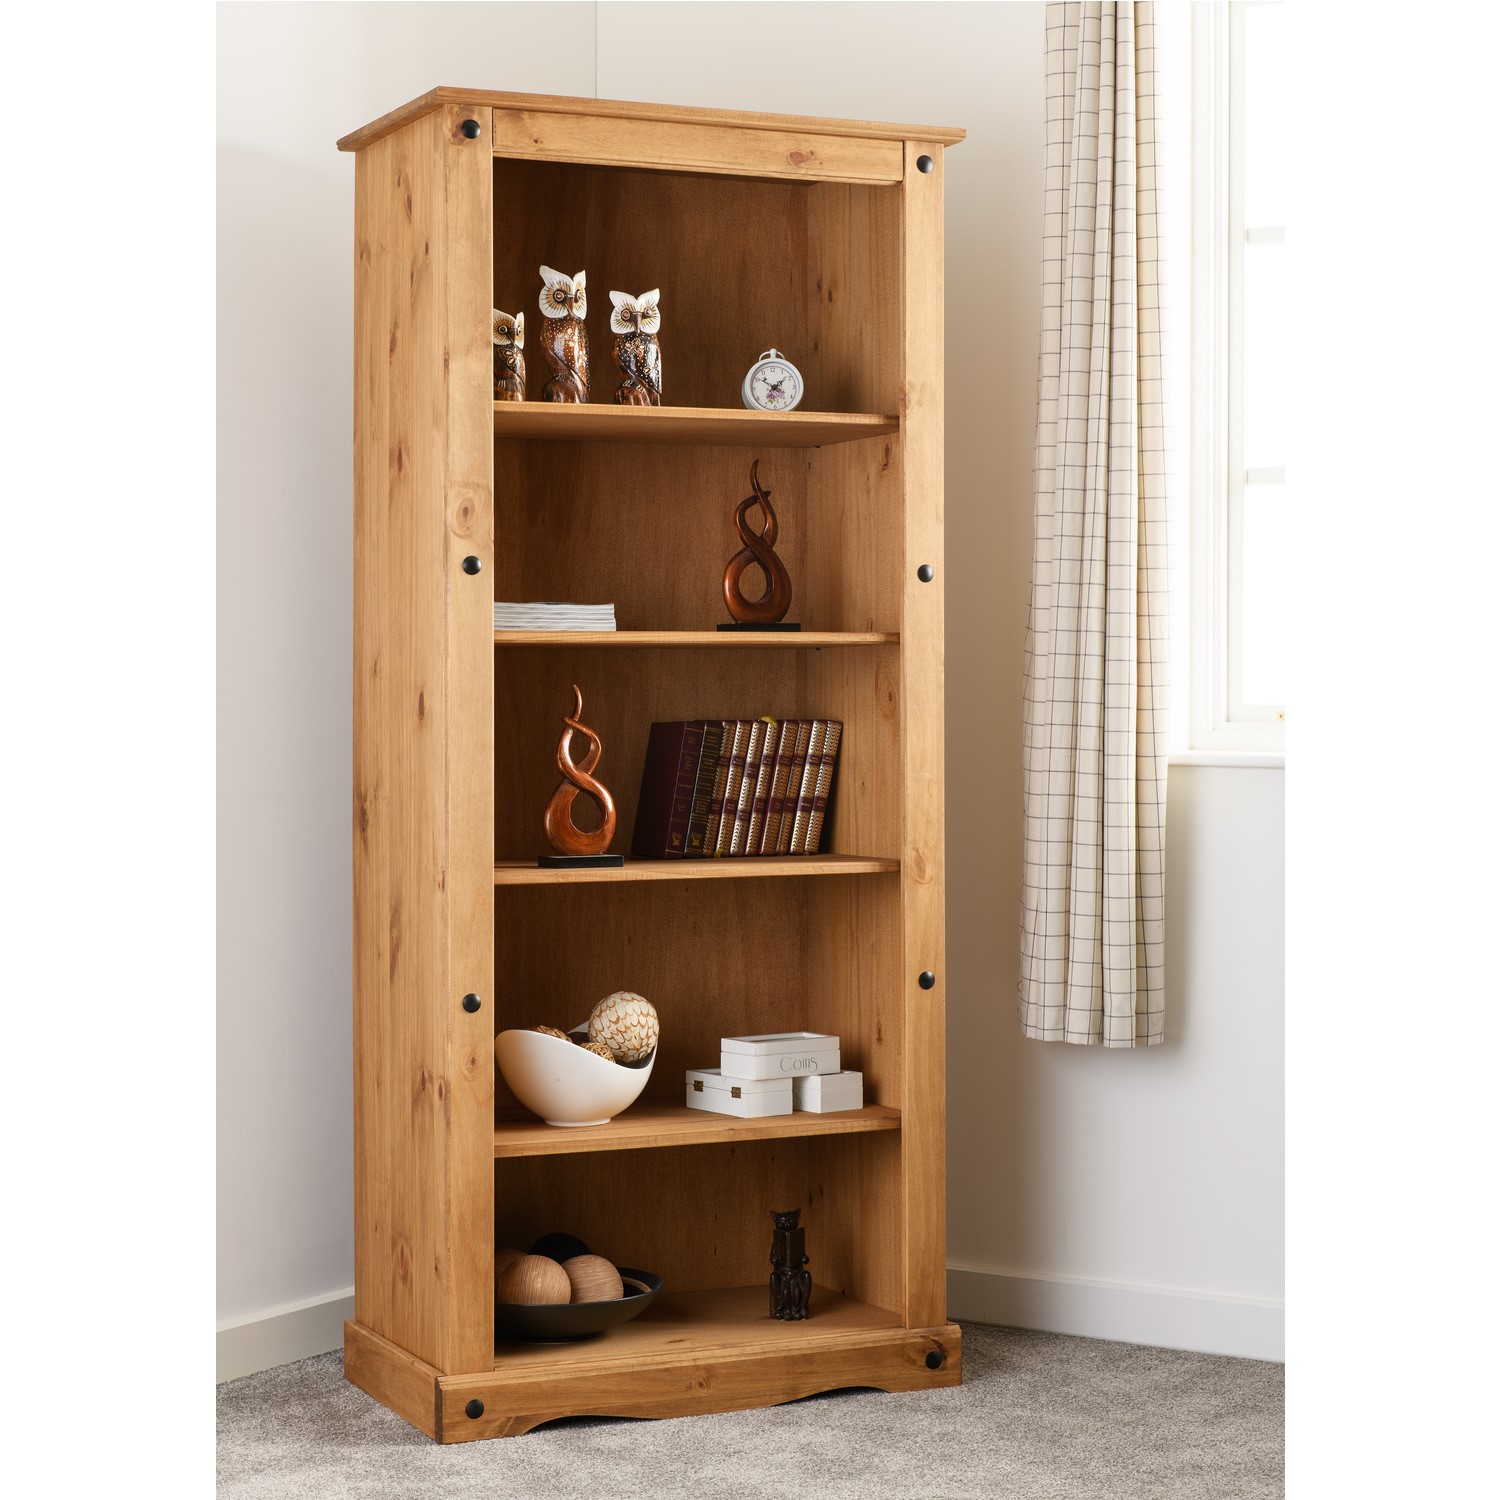 Seconique Original Corona Pine Tall, Tall Solid Wood Bookcase With Doors